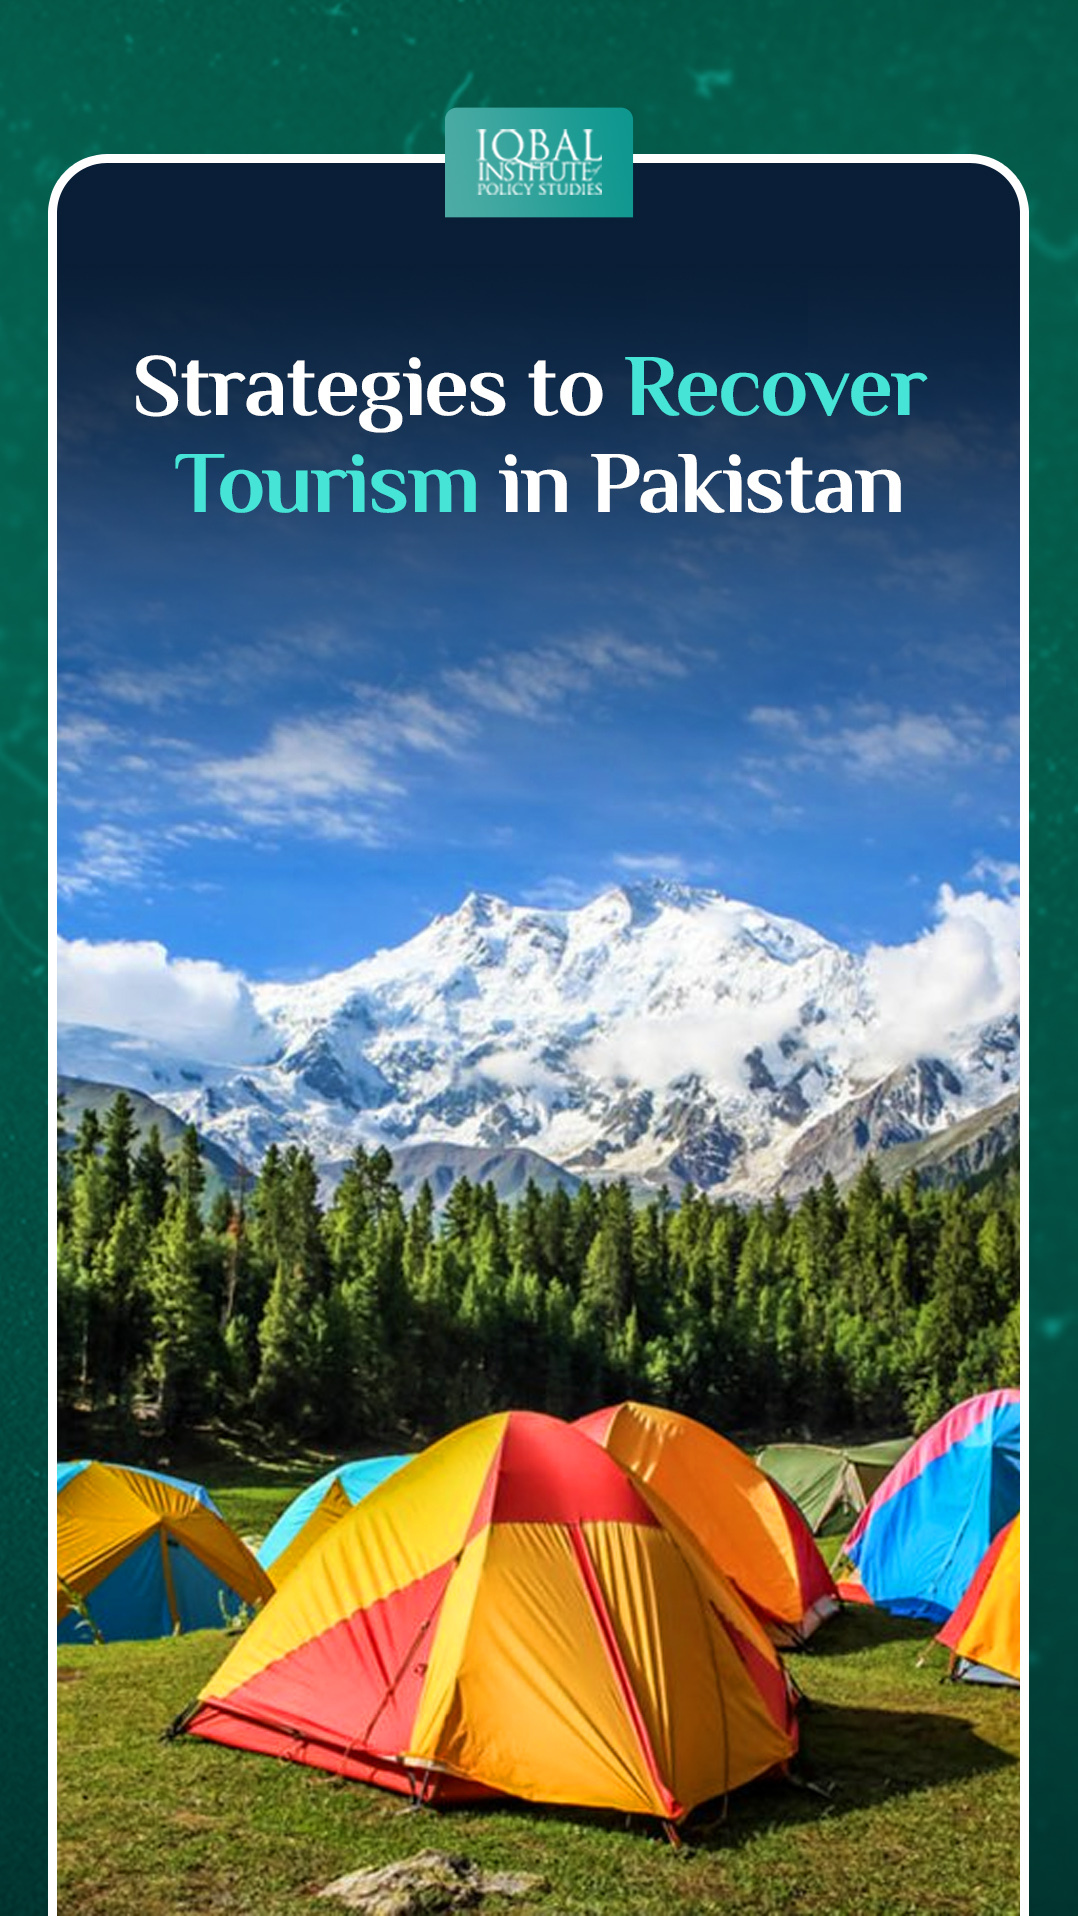 Strategies to Recover Tourism in Pakistan